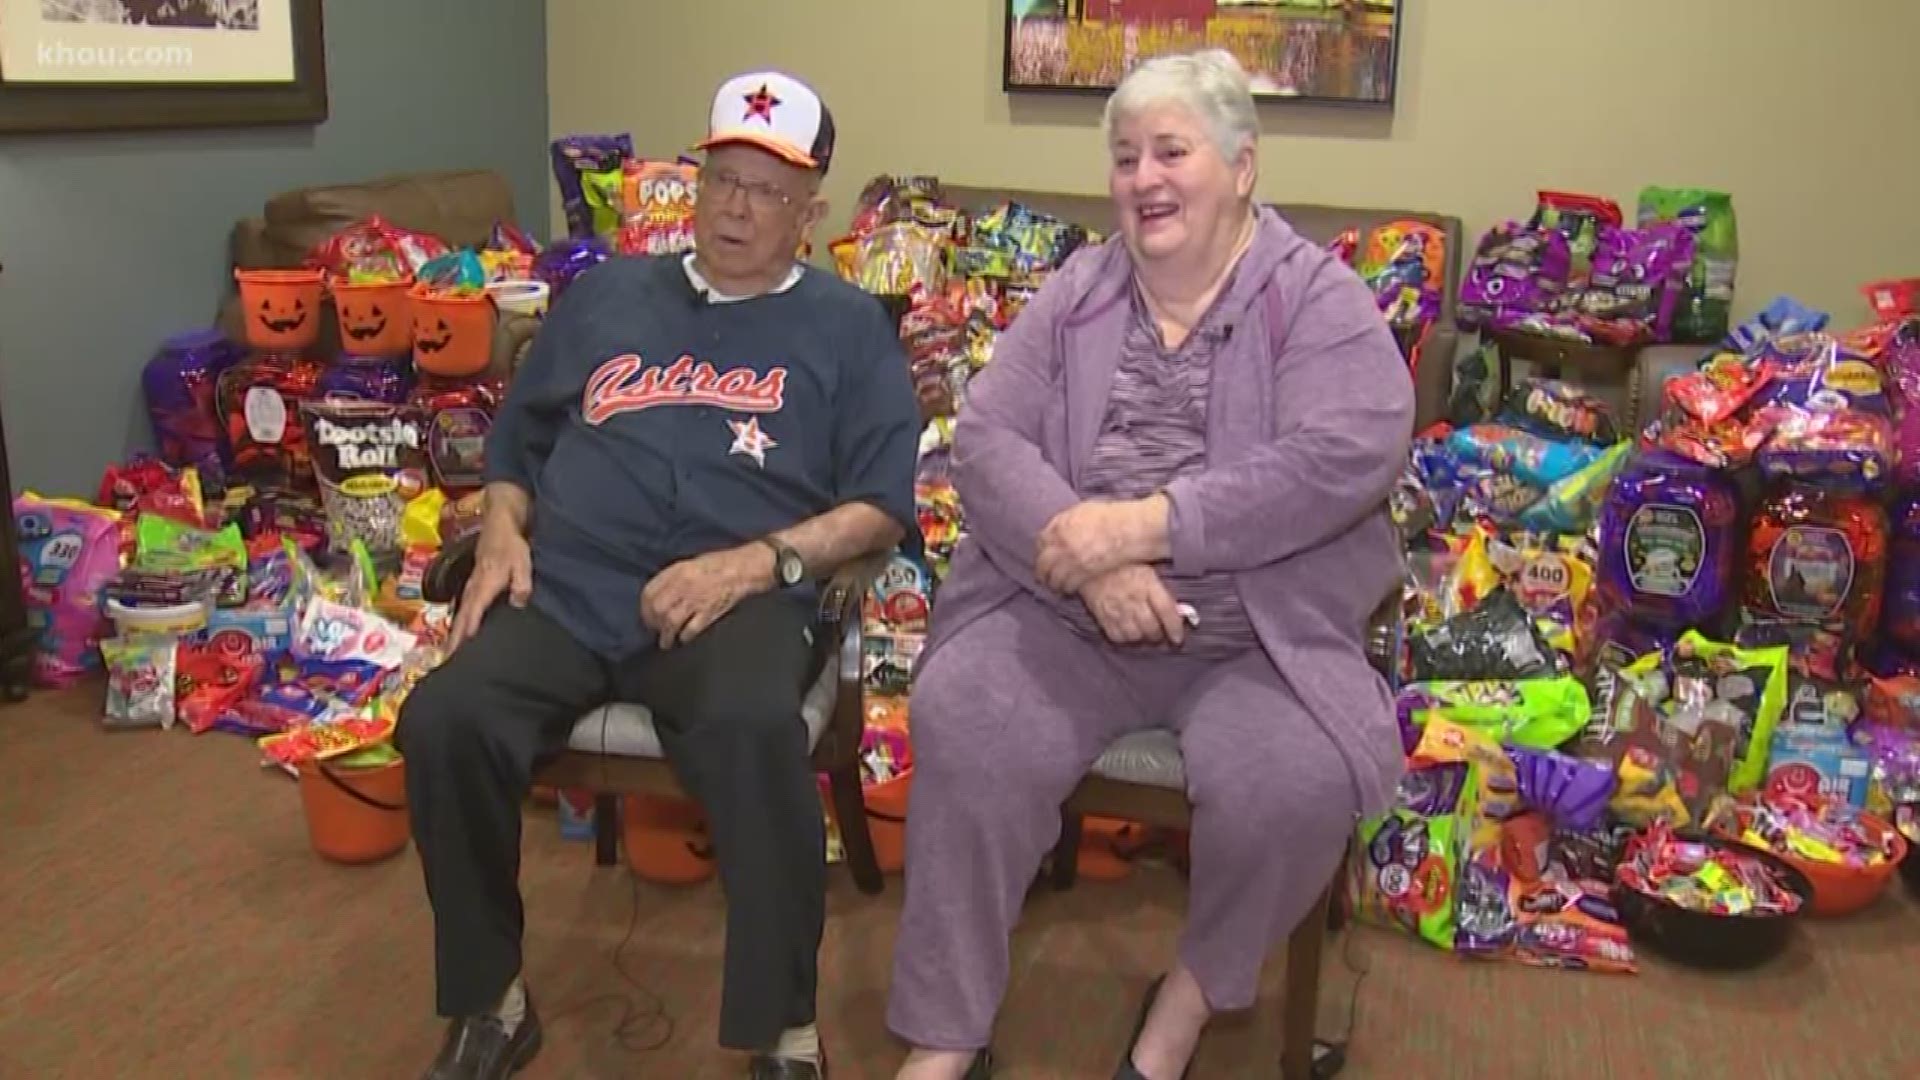 It's going to be an exciting Halloween for residents at Heartis Clear Lake, a senior living facility, and it all started out with a simple request: Candy donations.